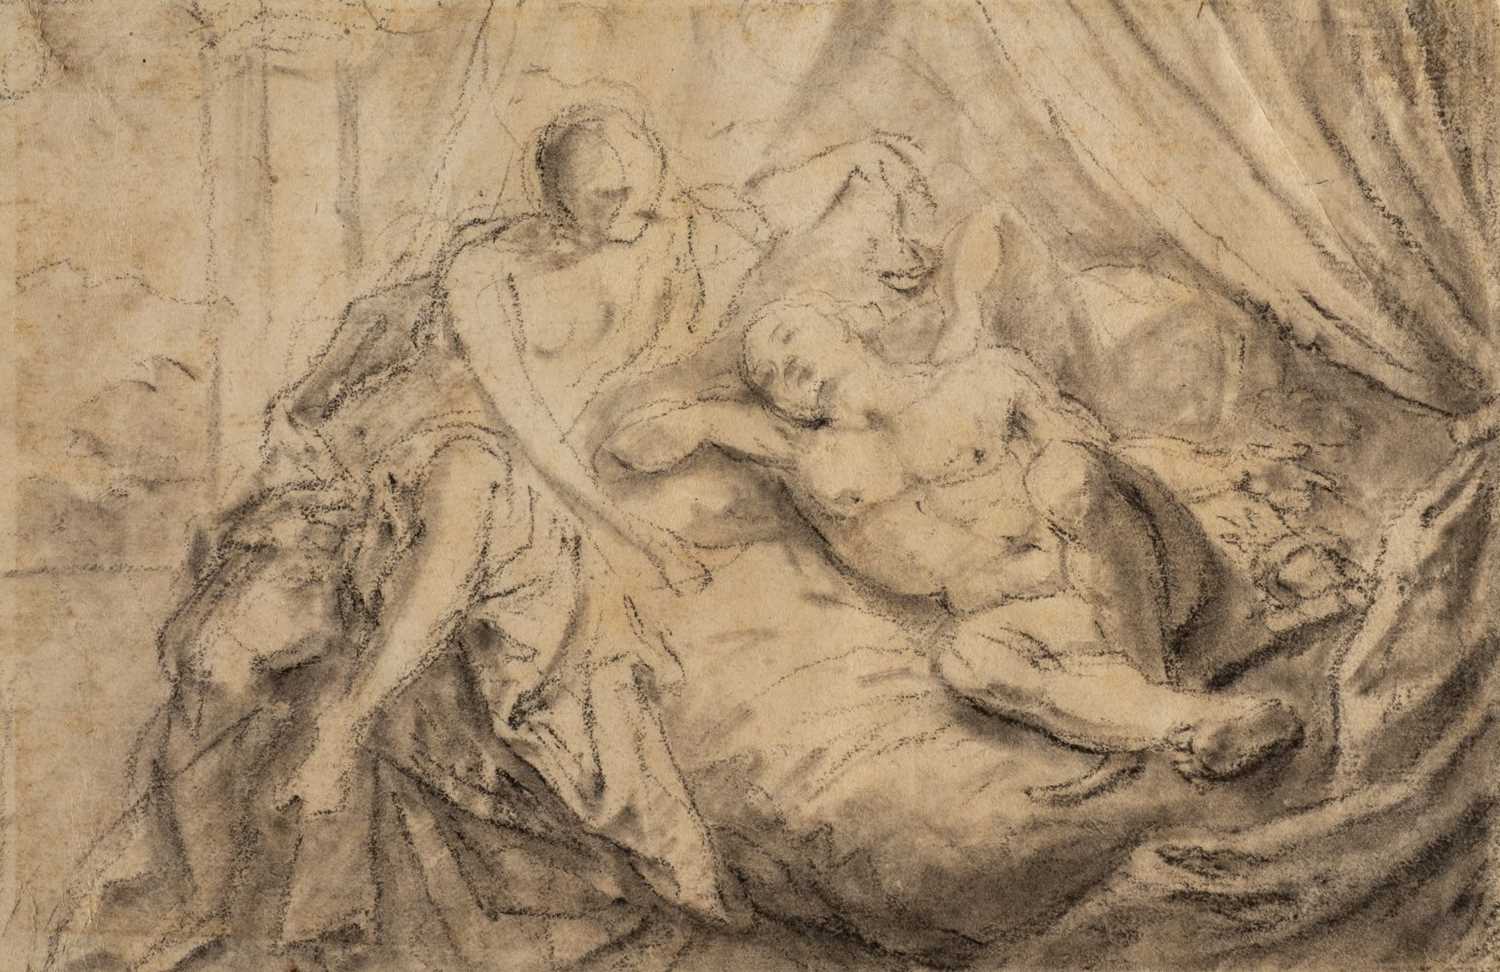 Lot 315 - Errard (Charles, 1606-1689). Young woman watching over a sleeping male figure